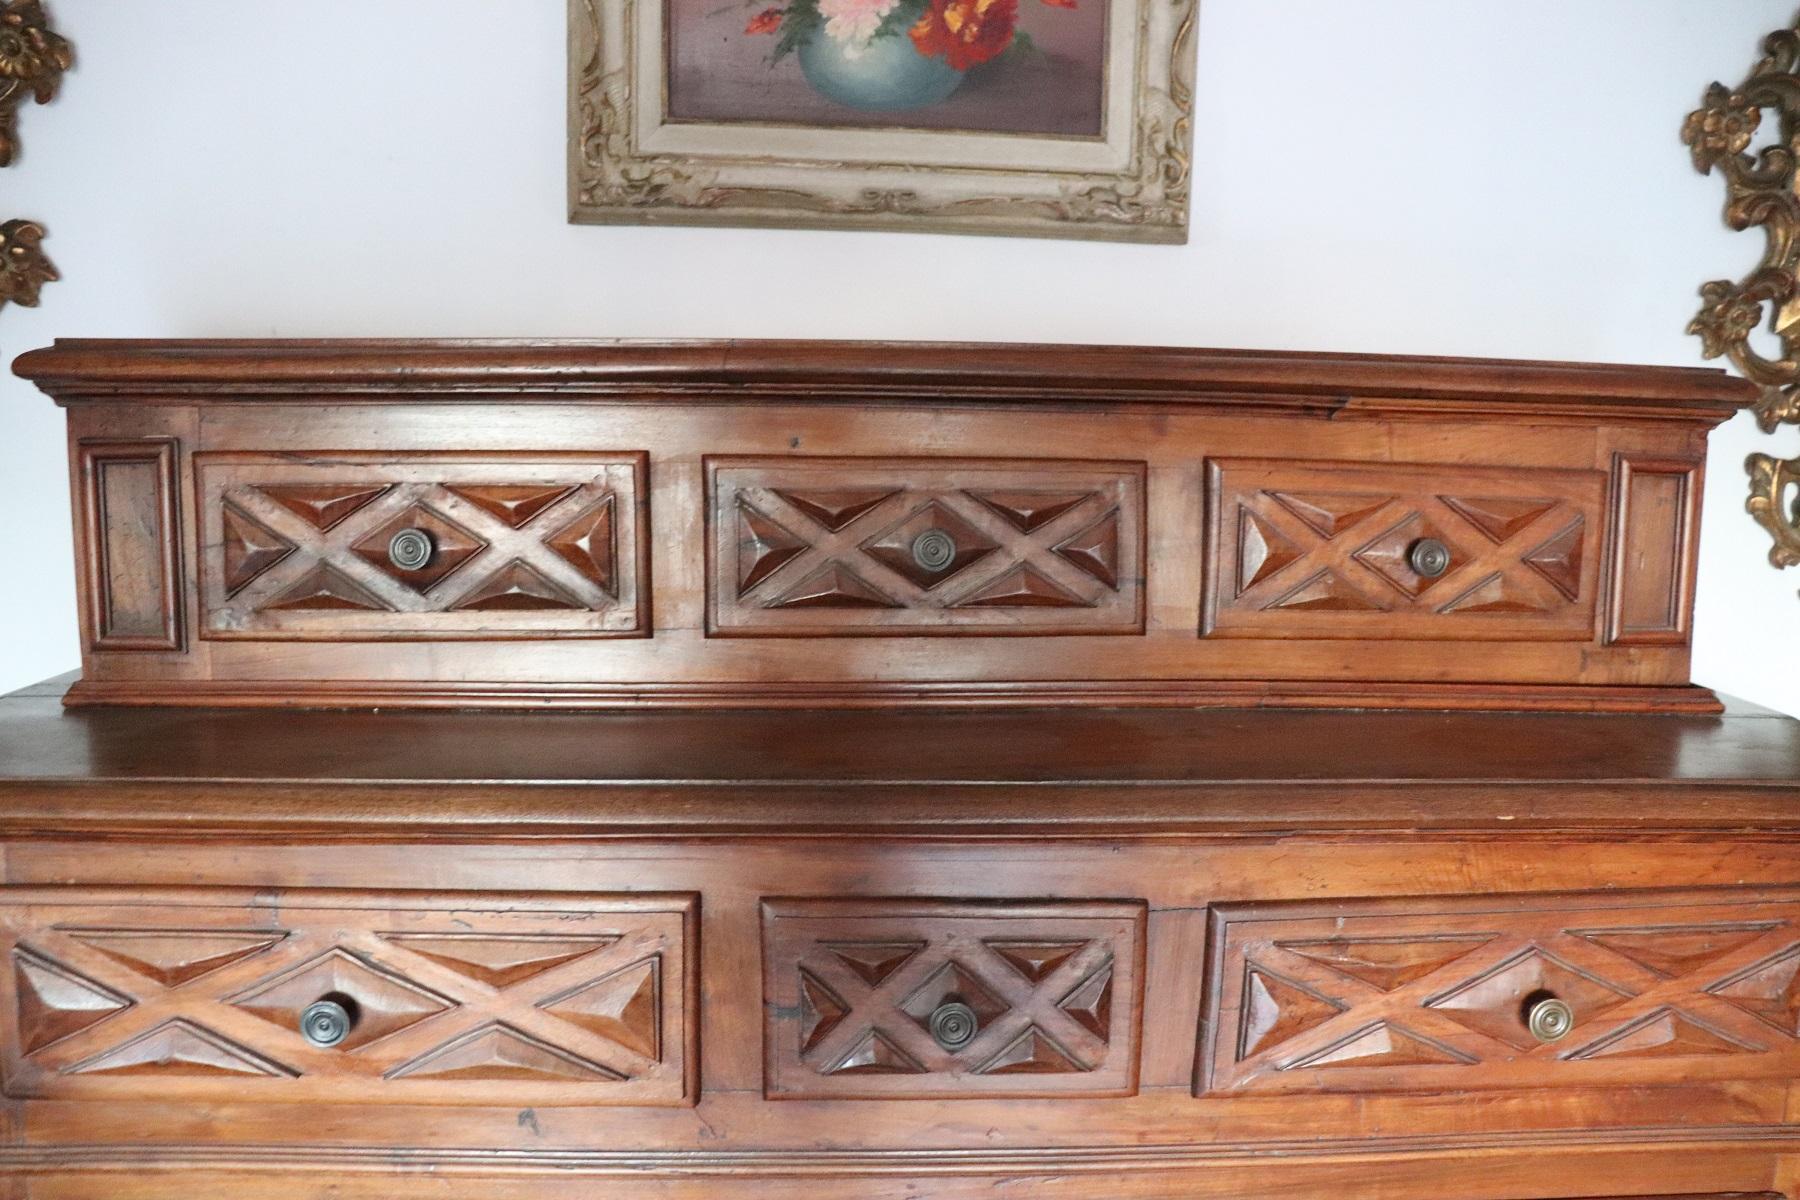 Beautiful rare large sideboard from the 17th century in Baroque Italian taste. The sideboard was in fact made by cabinet makers using wood and nails from the seventeenth century. Sideboard is also large in large internal useful space. Perfect for